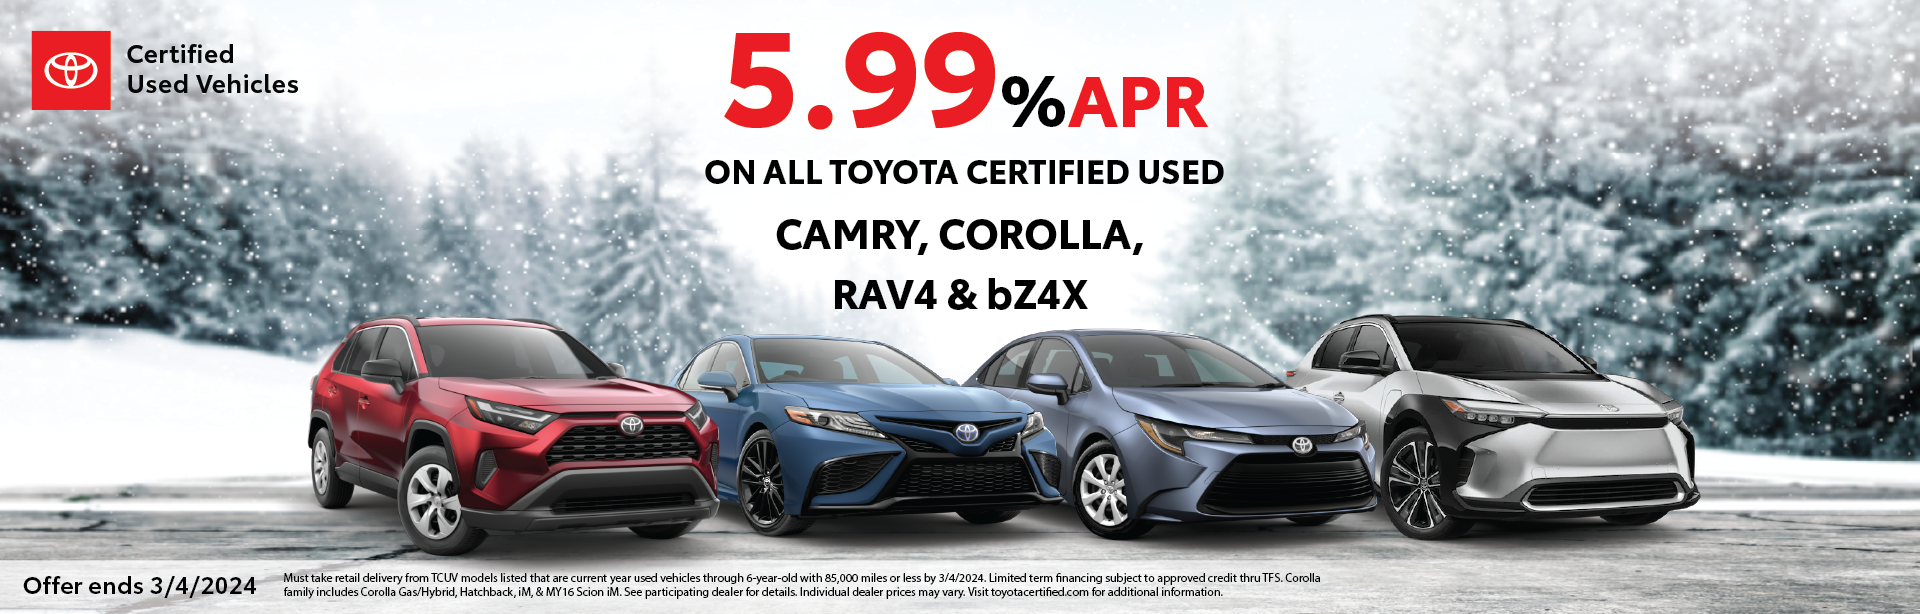 Toyota Certified Used Vehicle Offer | Toyota of Grand Rapids in Grand Rapids MI